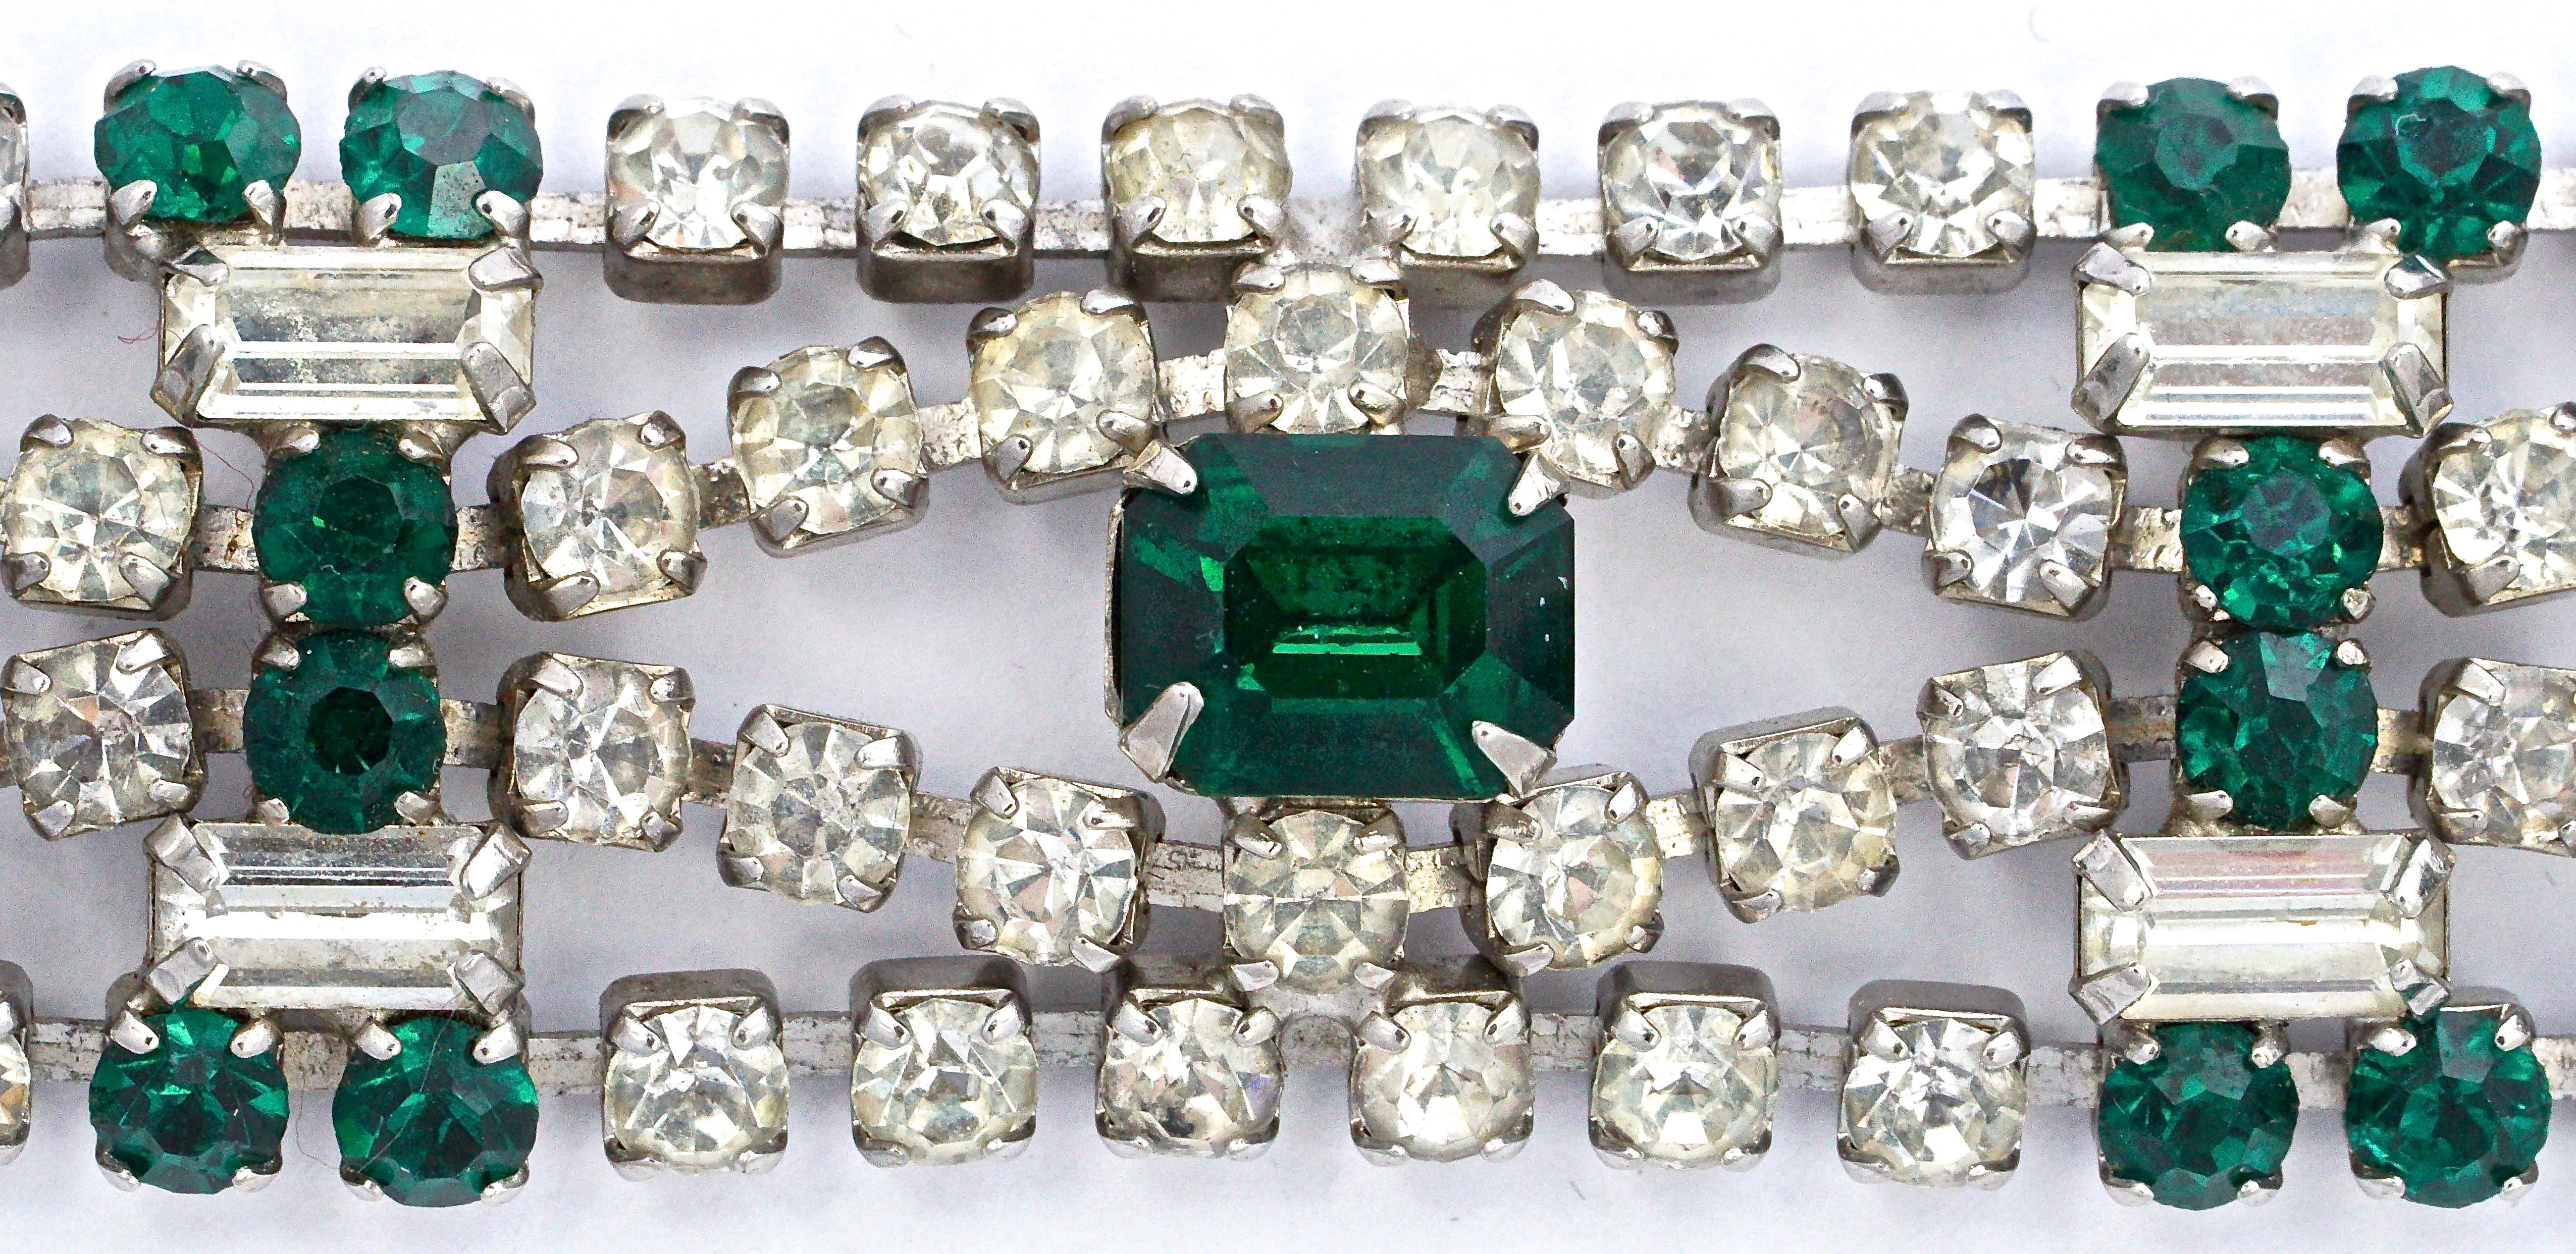 Beautiful silver tone bracelet featuring faceted emerald green and clear rhinestones, with a fold over clasp. The bracelet is slightly curved, and is in very good condition with all the original stones, circa 1950s. At a later date, the bracelet has